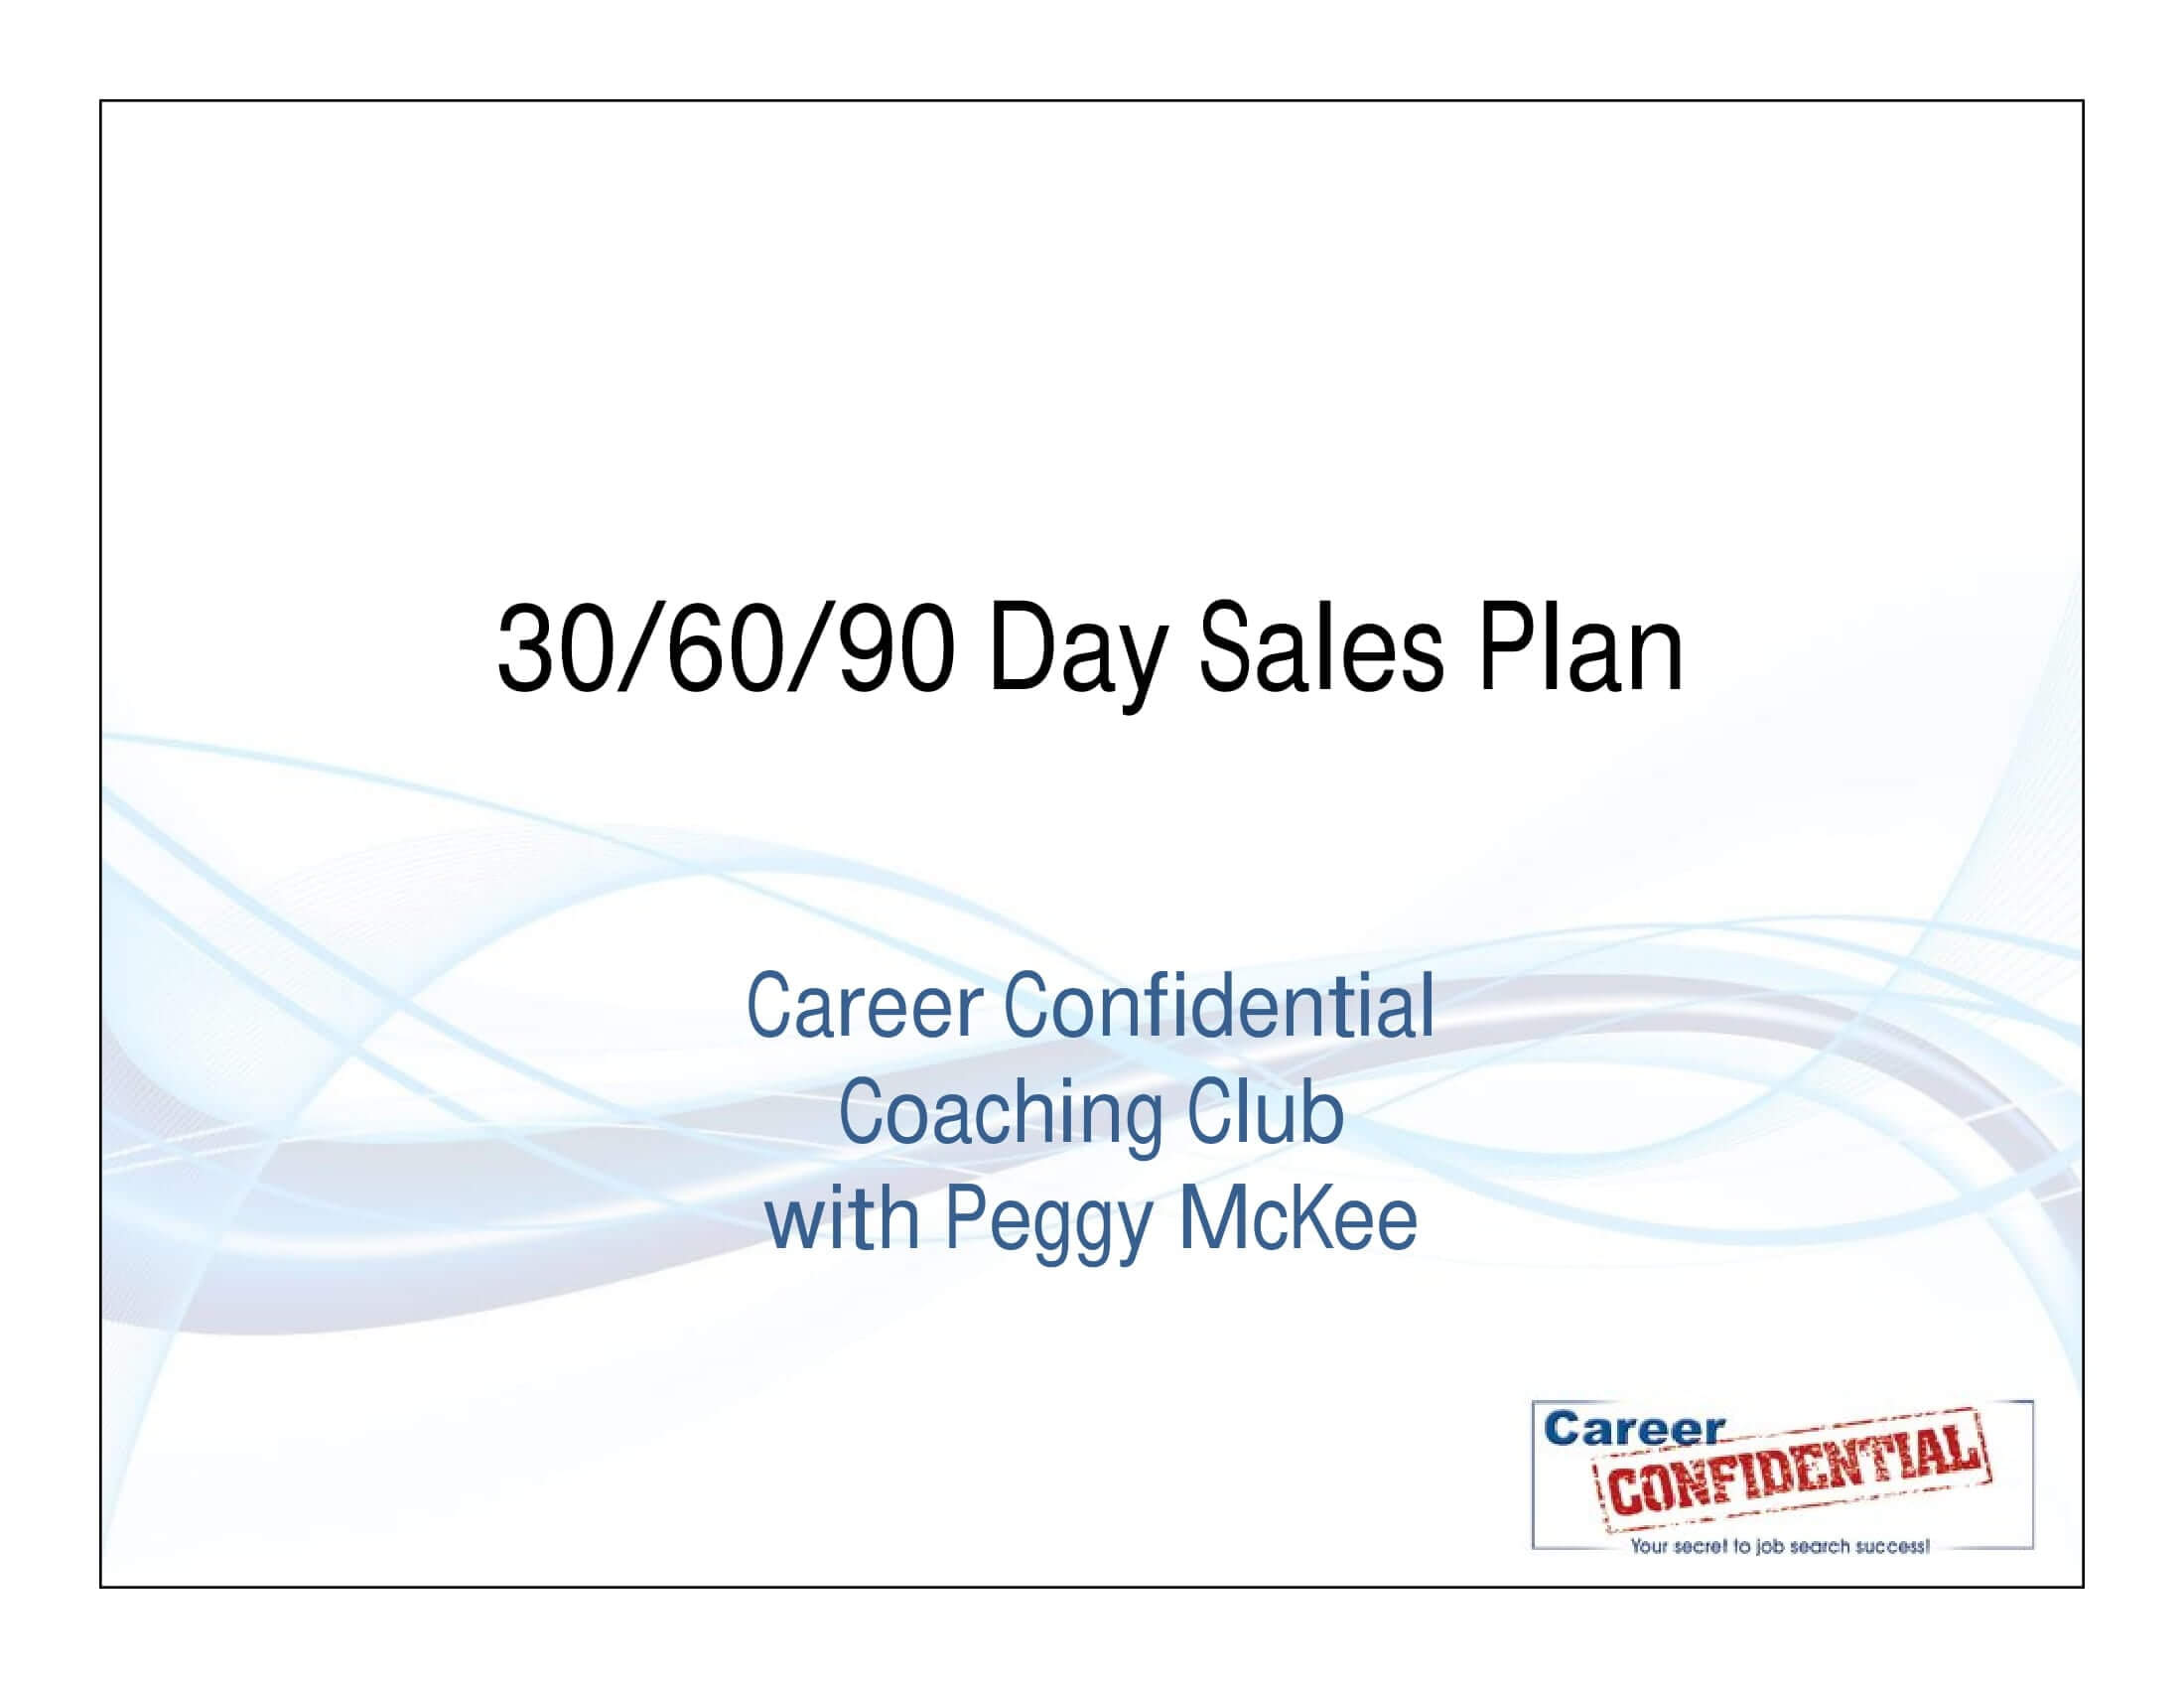 12+ 30 60 90 Day Sales Plan Examples – Pdf, Word | Examples With Regard To 30 60 90 Day Sales Plan Template Free Sample